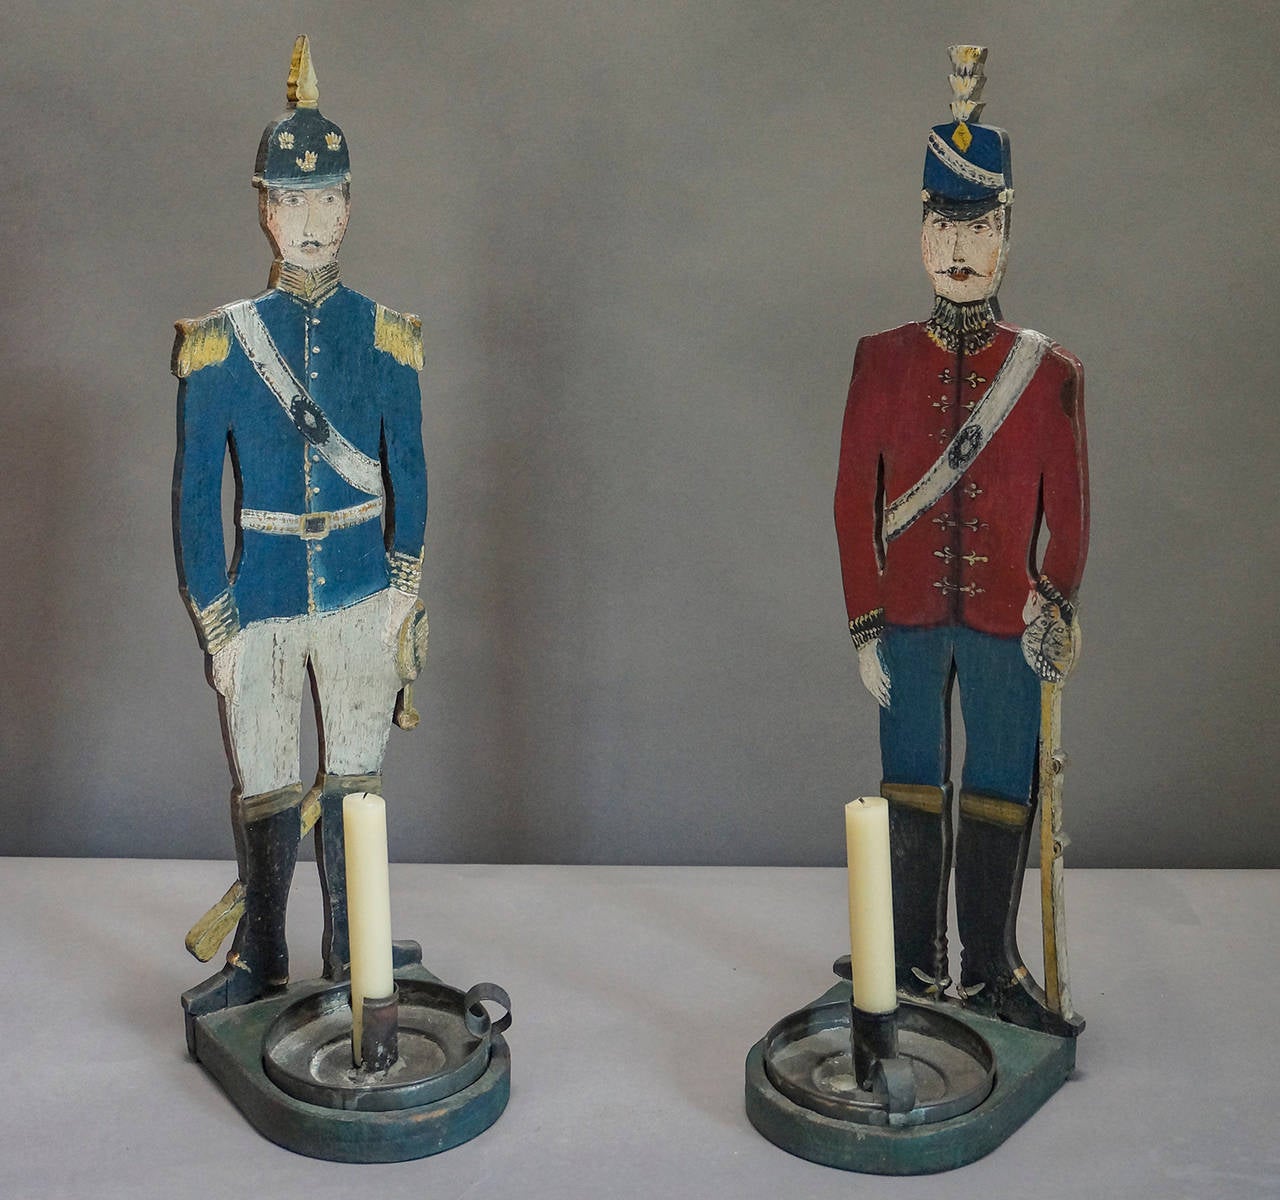 Pair of hand-painted wood soldiers on stands, Sweden, circa 1880. Each holds his own tin chamberstick. Charming example of Swedish Folk Art.